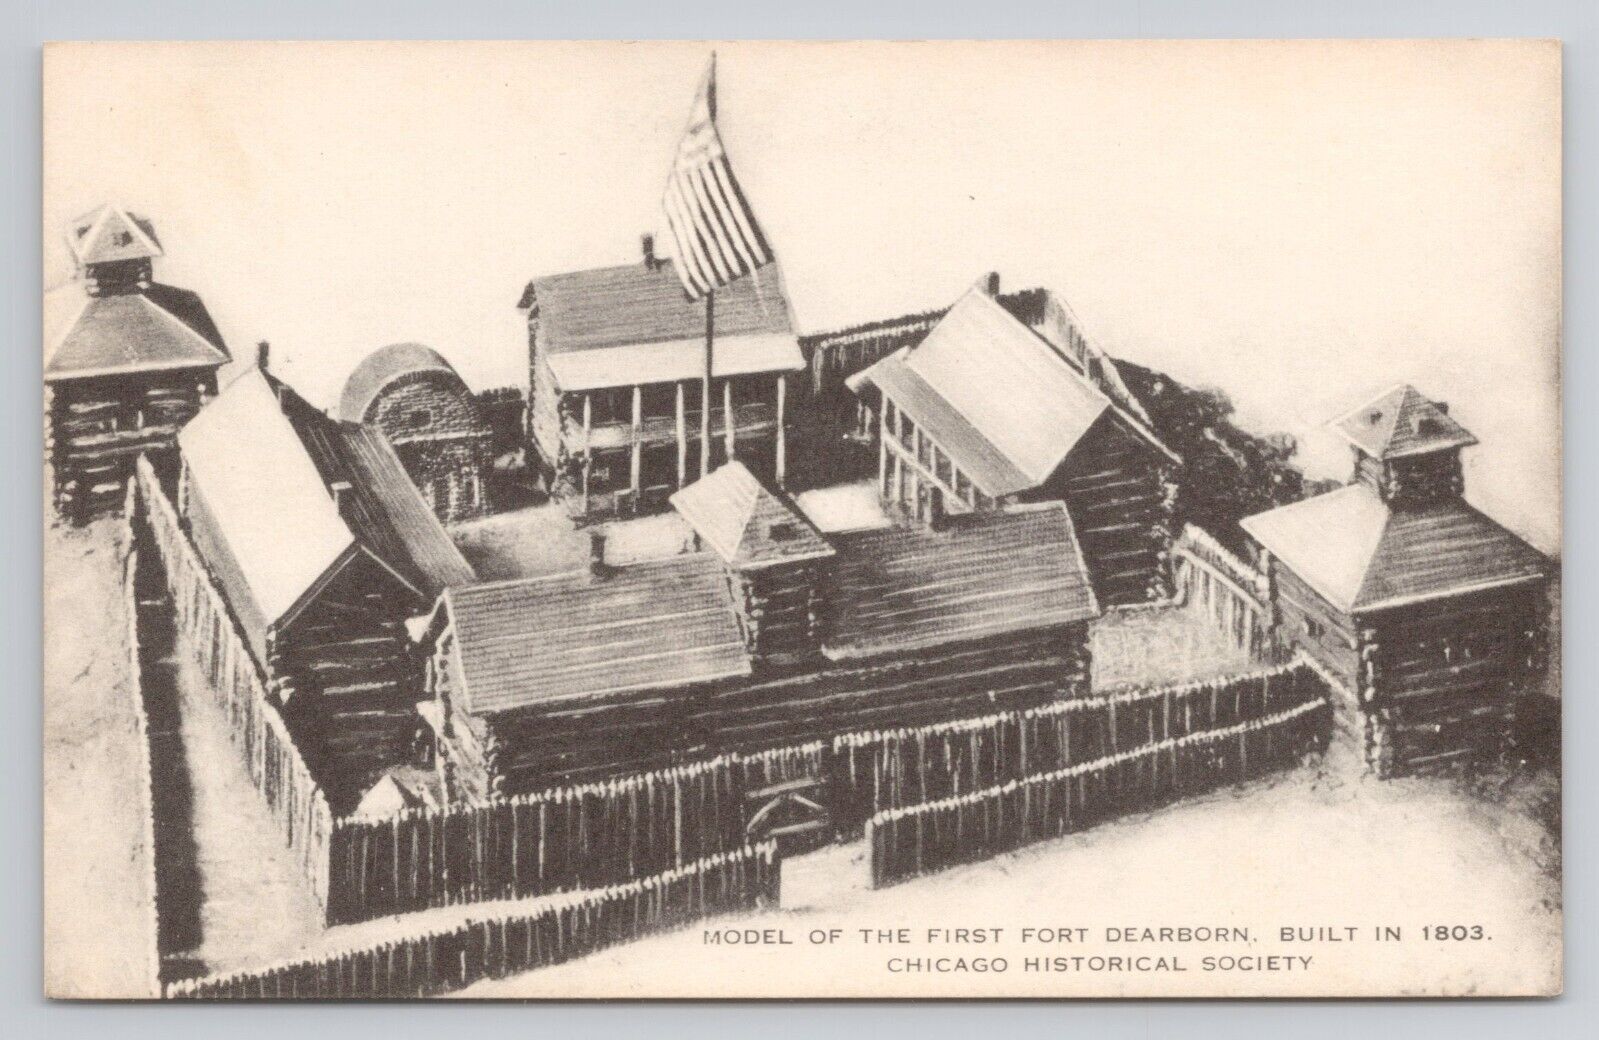 Model of The First Fort Dearborn Built in 1803 Chicago Historical Society